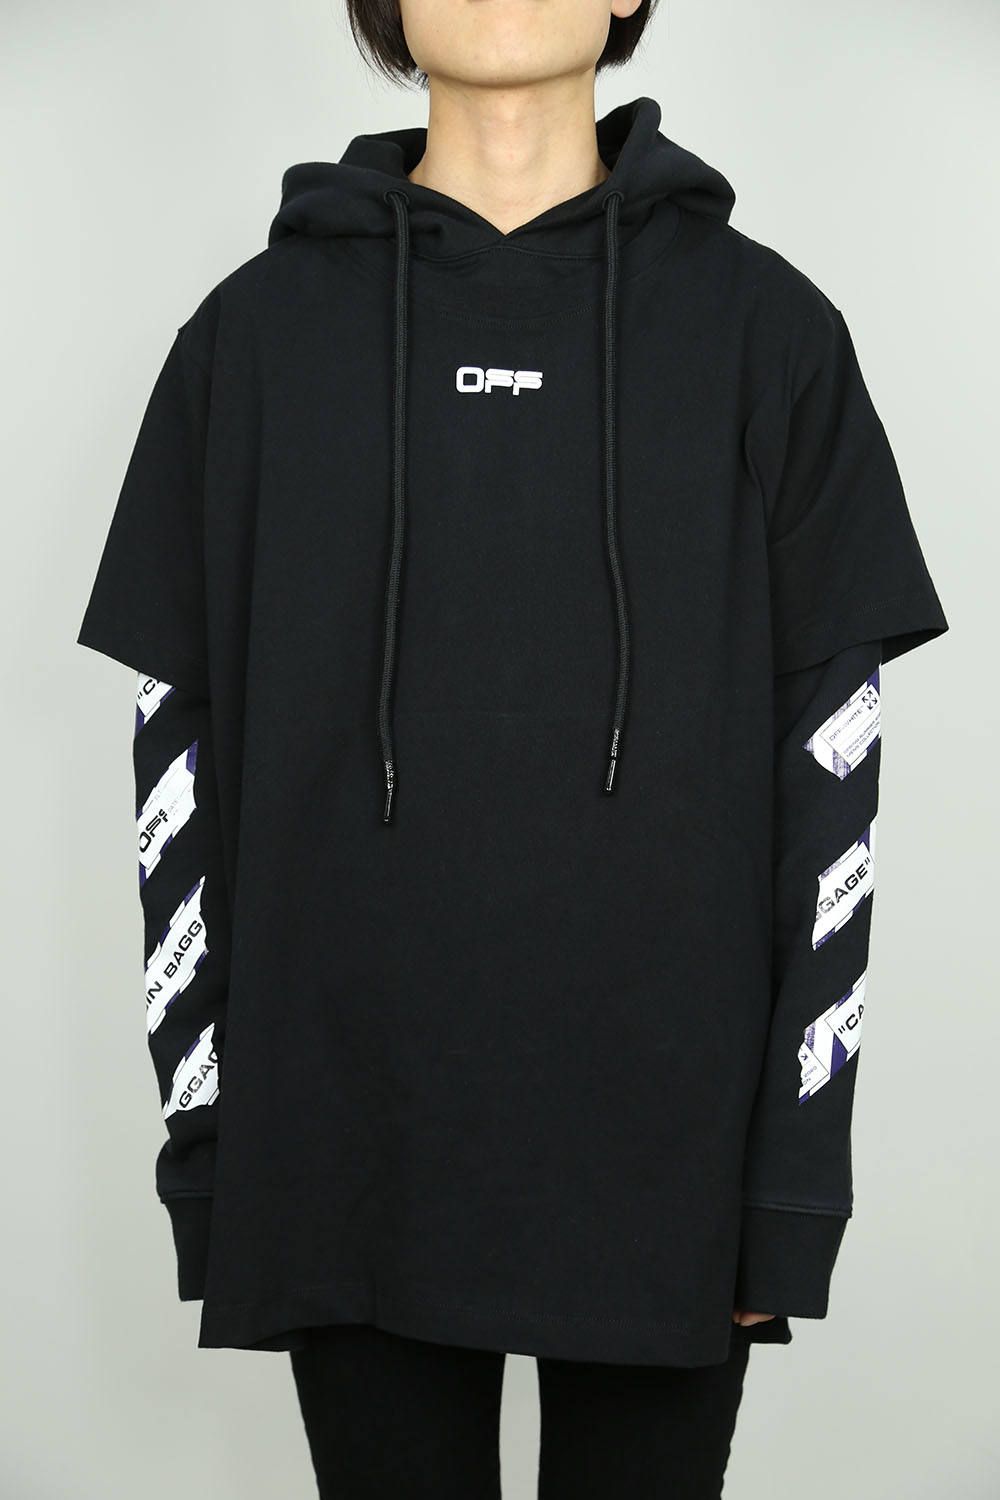 OFF-WHITE - AIRPORT TAPE DOUBLE TEE HOODIE / ブラック | Tempt